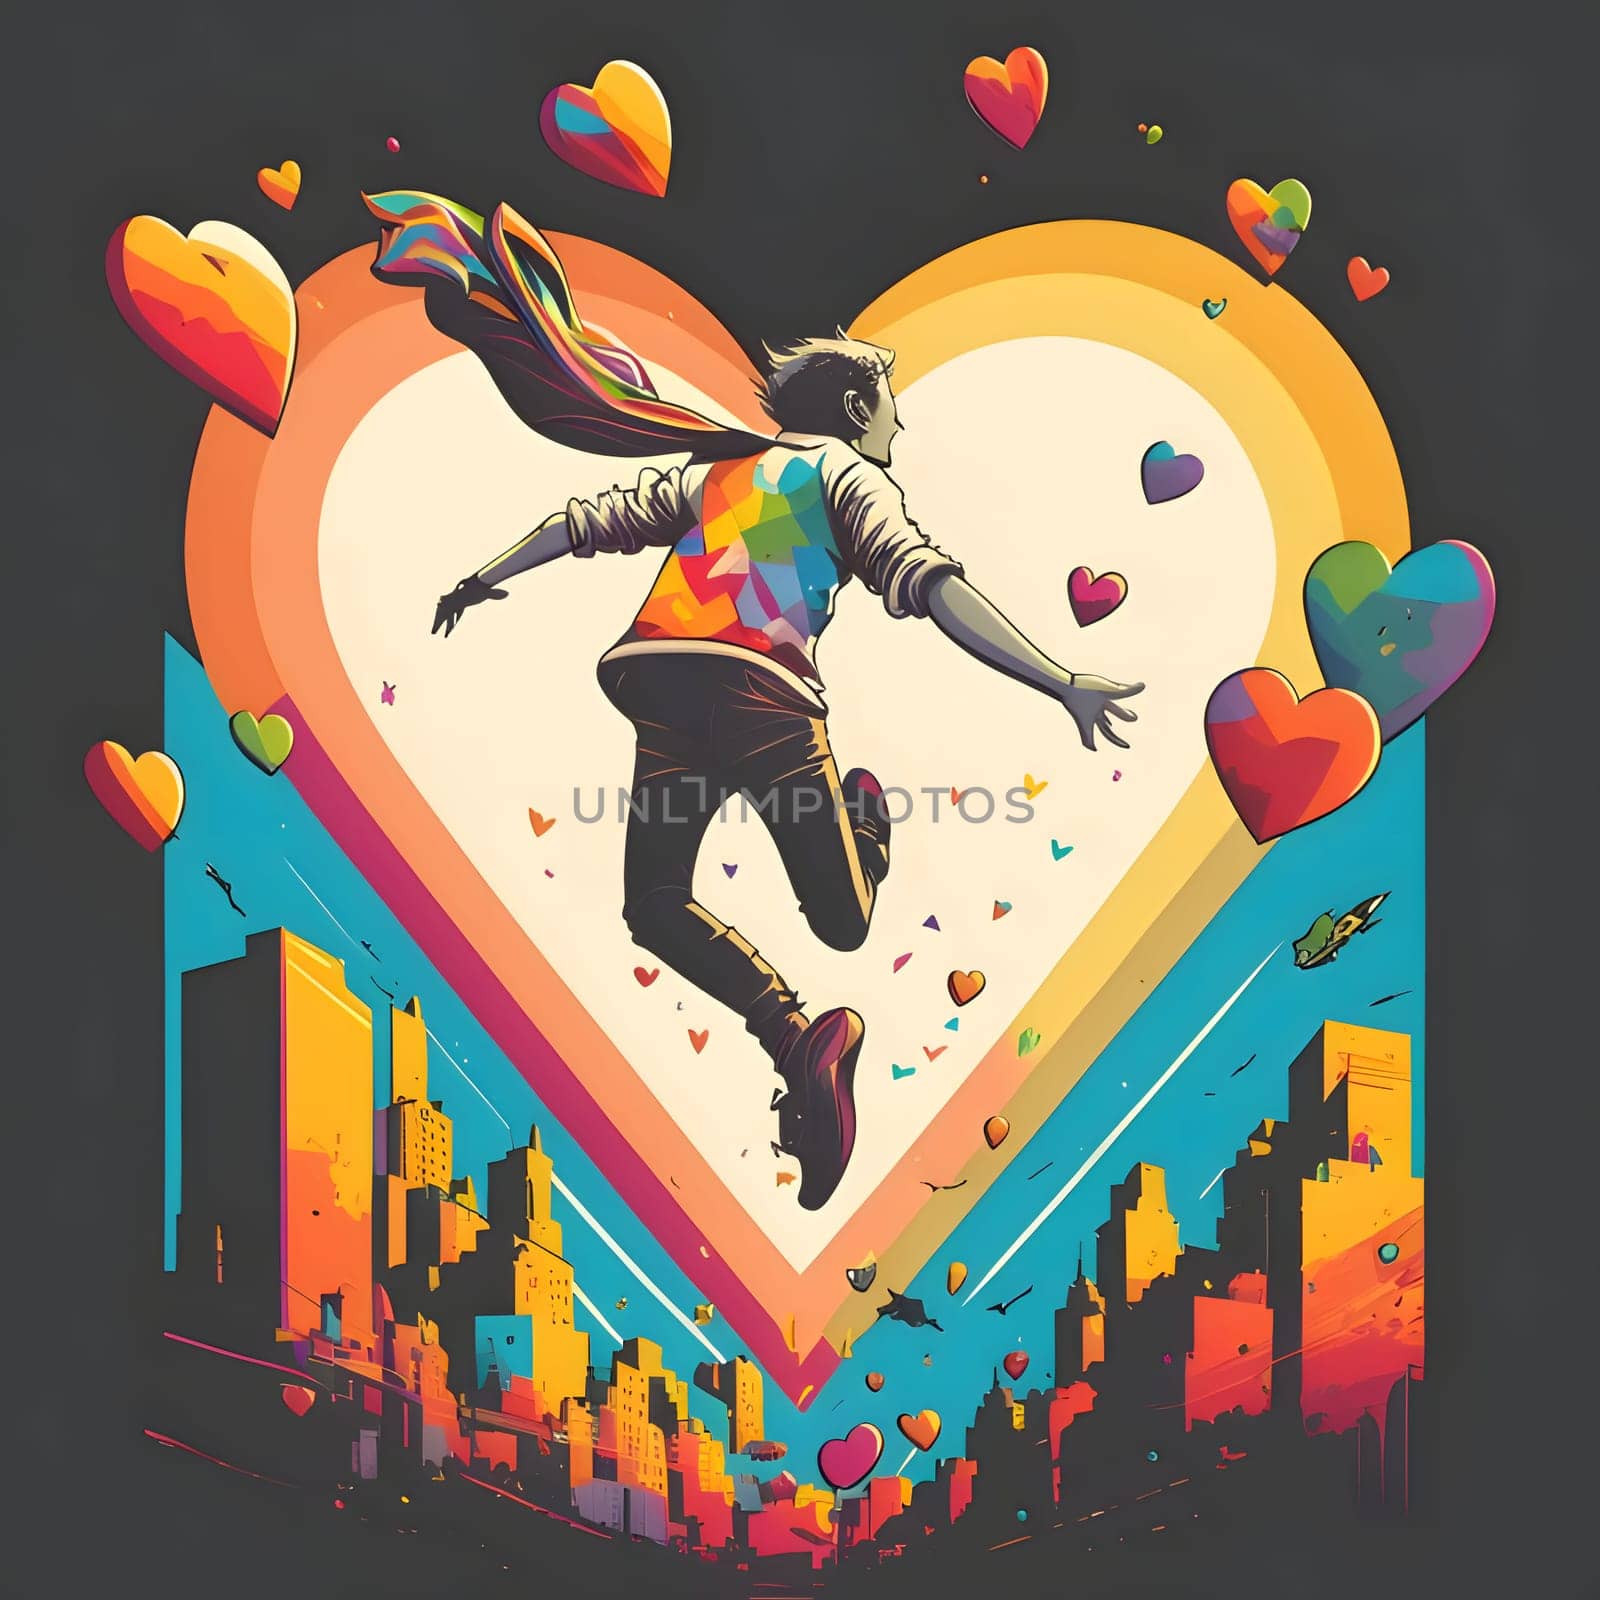 Abstract illustration of a man jumping over colorful stripes, blocks in the background, colorful hearts. Heart as a symbol of affection and love. by ThemesS